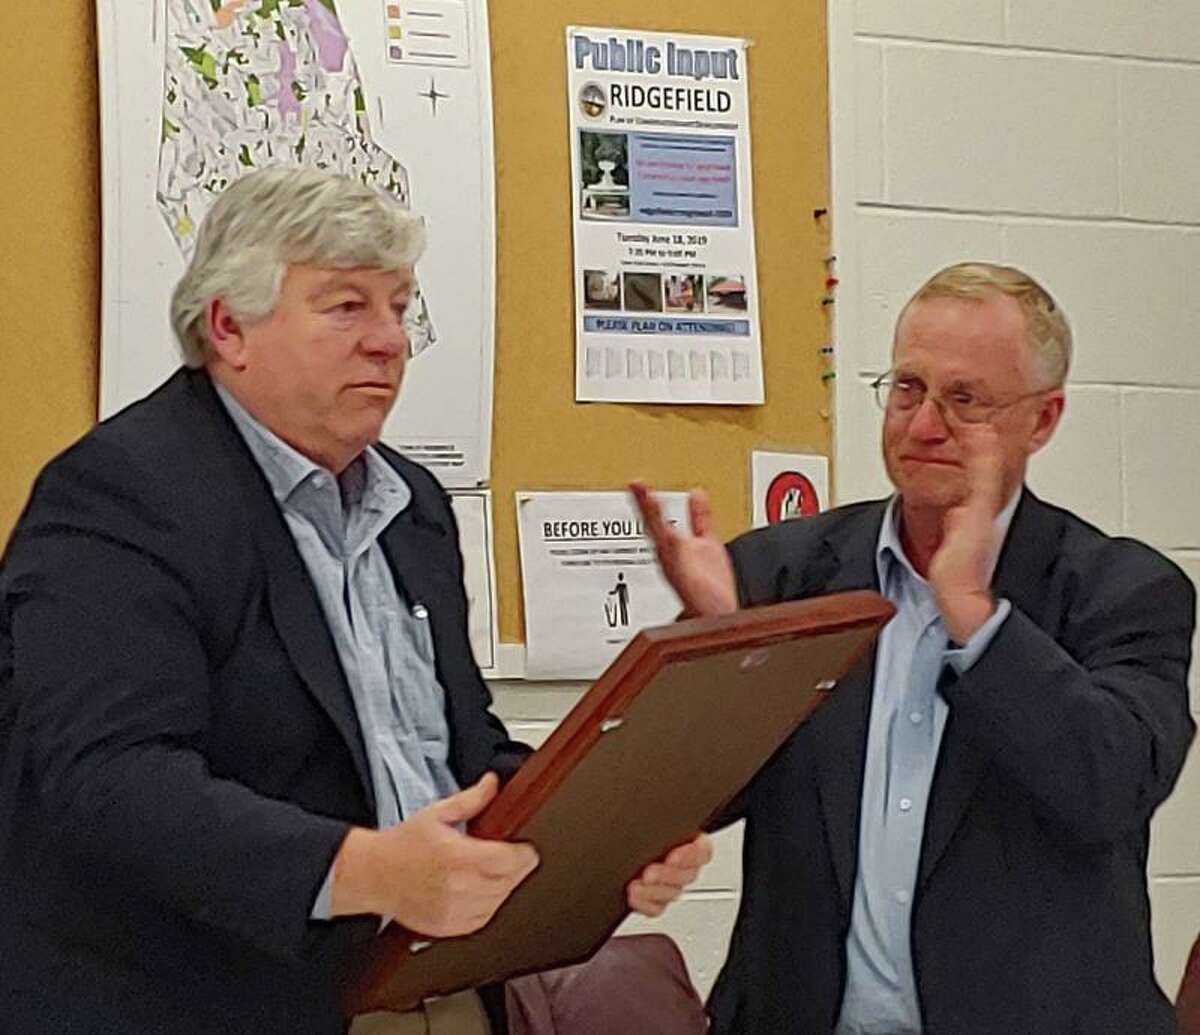 Lifelong Ridgefielder Charlie Knoche, left, received a plaque from the Police Commission Chairman George Kain in recognition for his 24 years of service on the commission. He stepped down June 13.